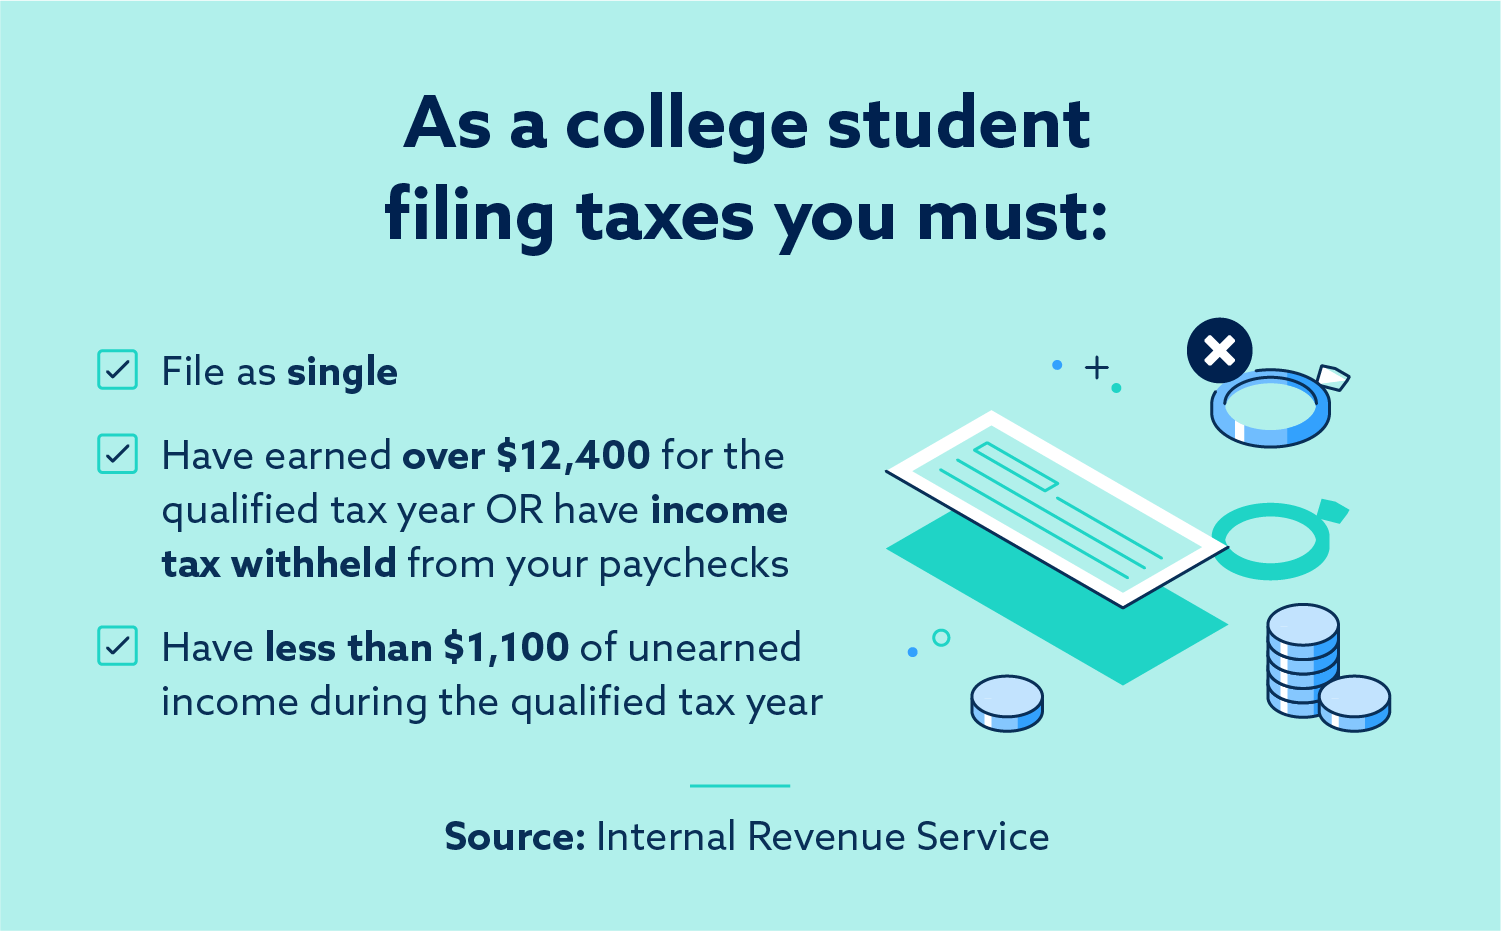 Guidelines for filing taxes as a college student.